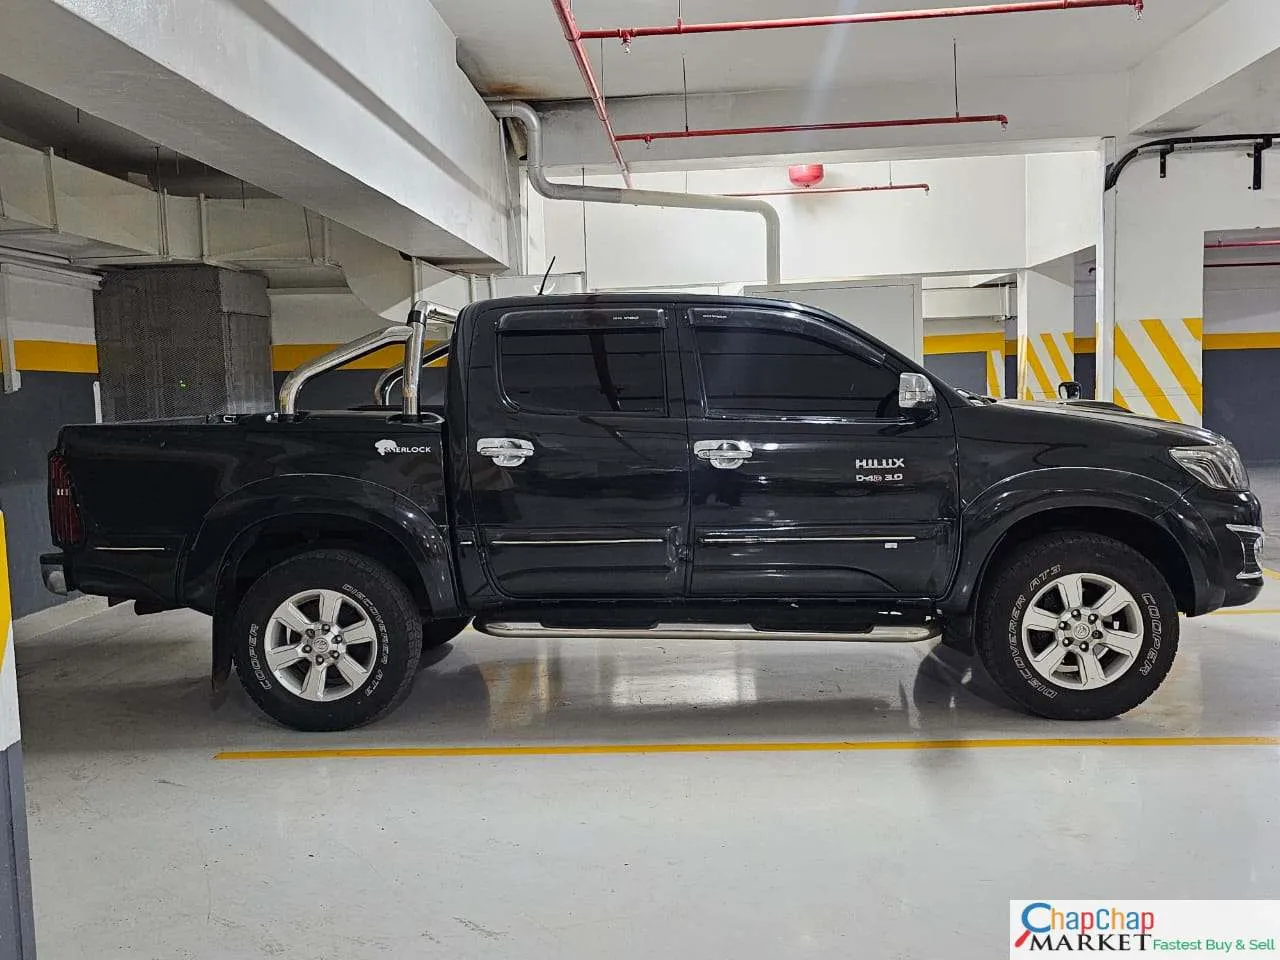 Toyota Hilux Double cab QUICK SALE You Pay 30% Deposit Installments trade in OK Hire purchase